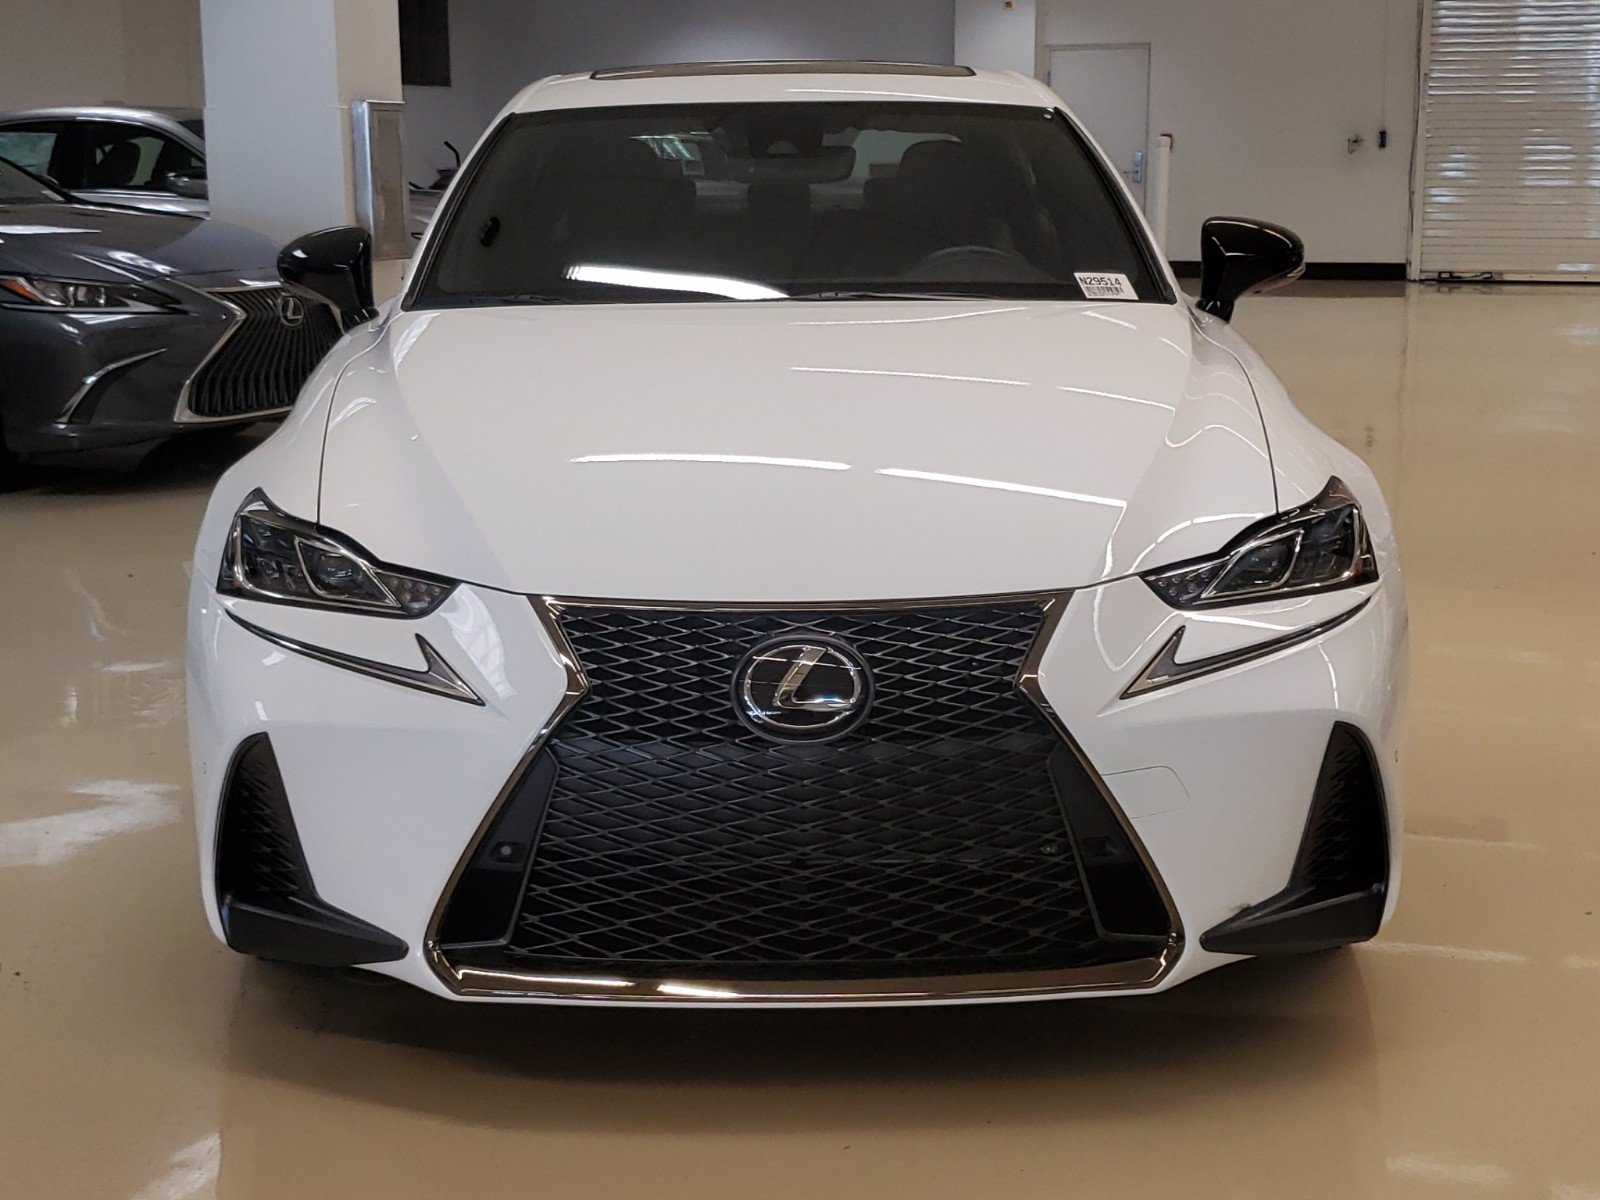 New 2020 Lexus IS 300 IS 300 F SPORT 4dr Car in Miami 